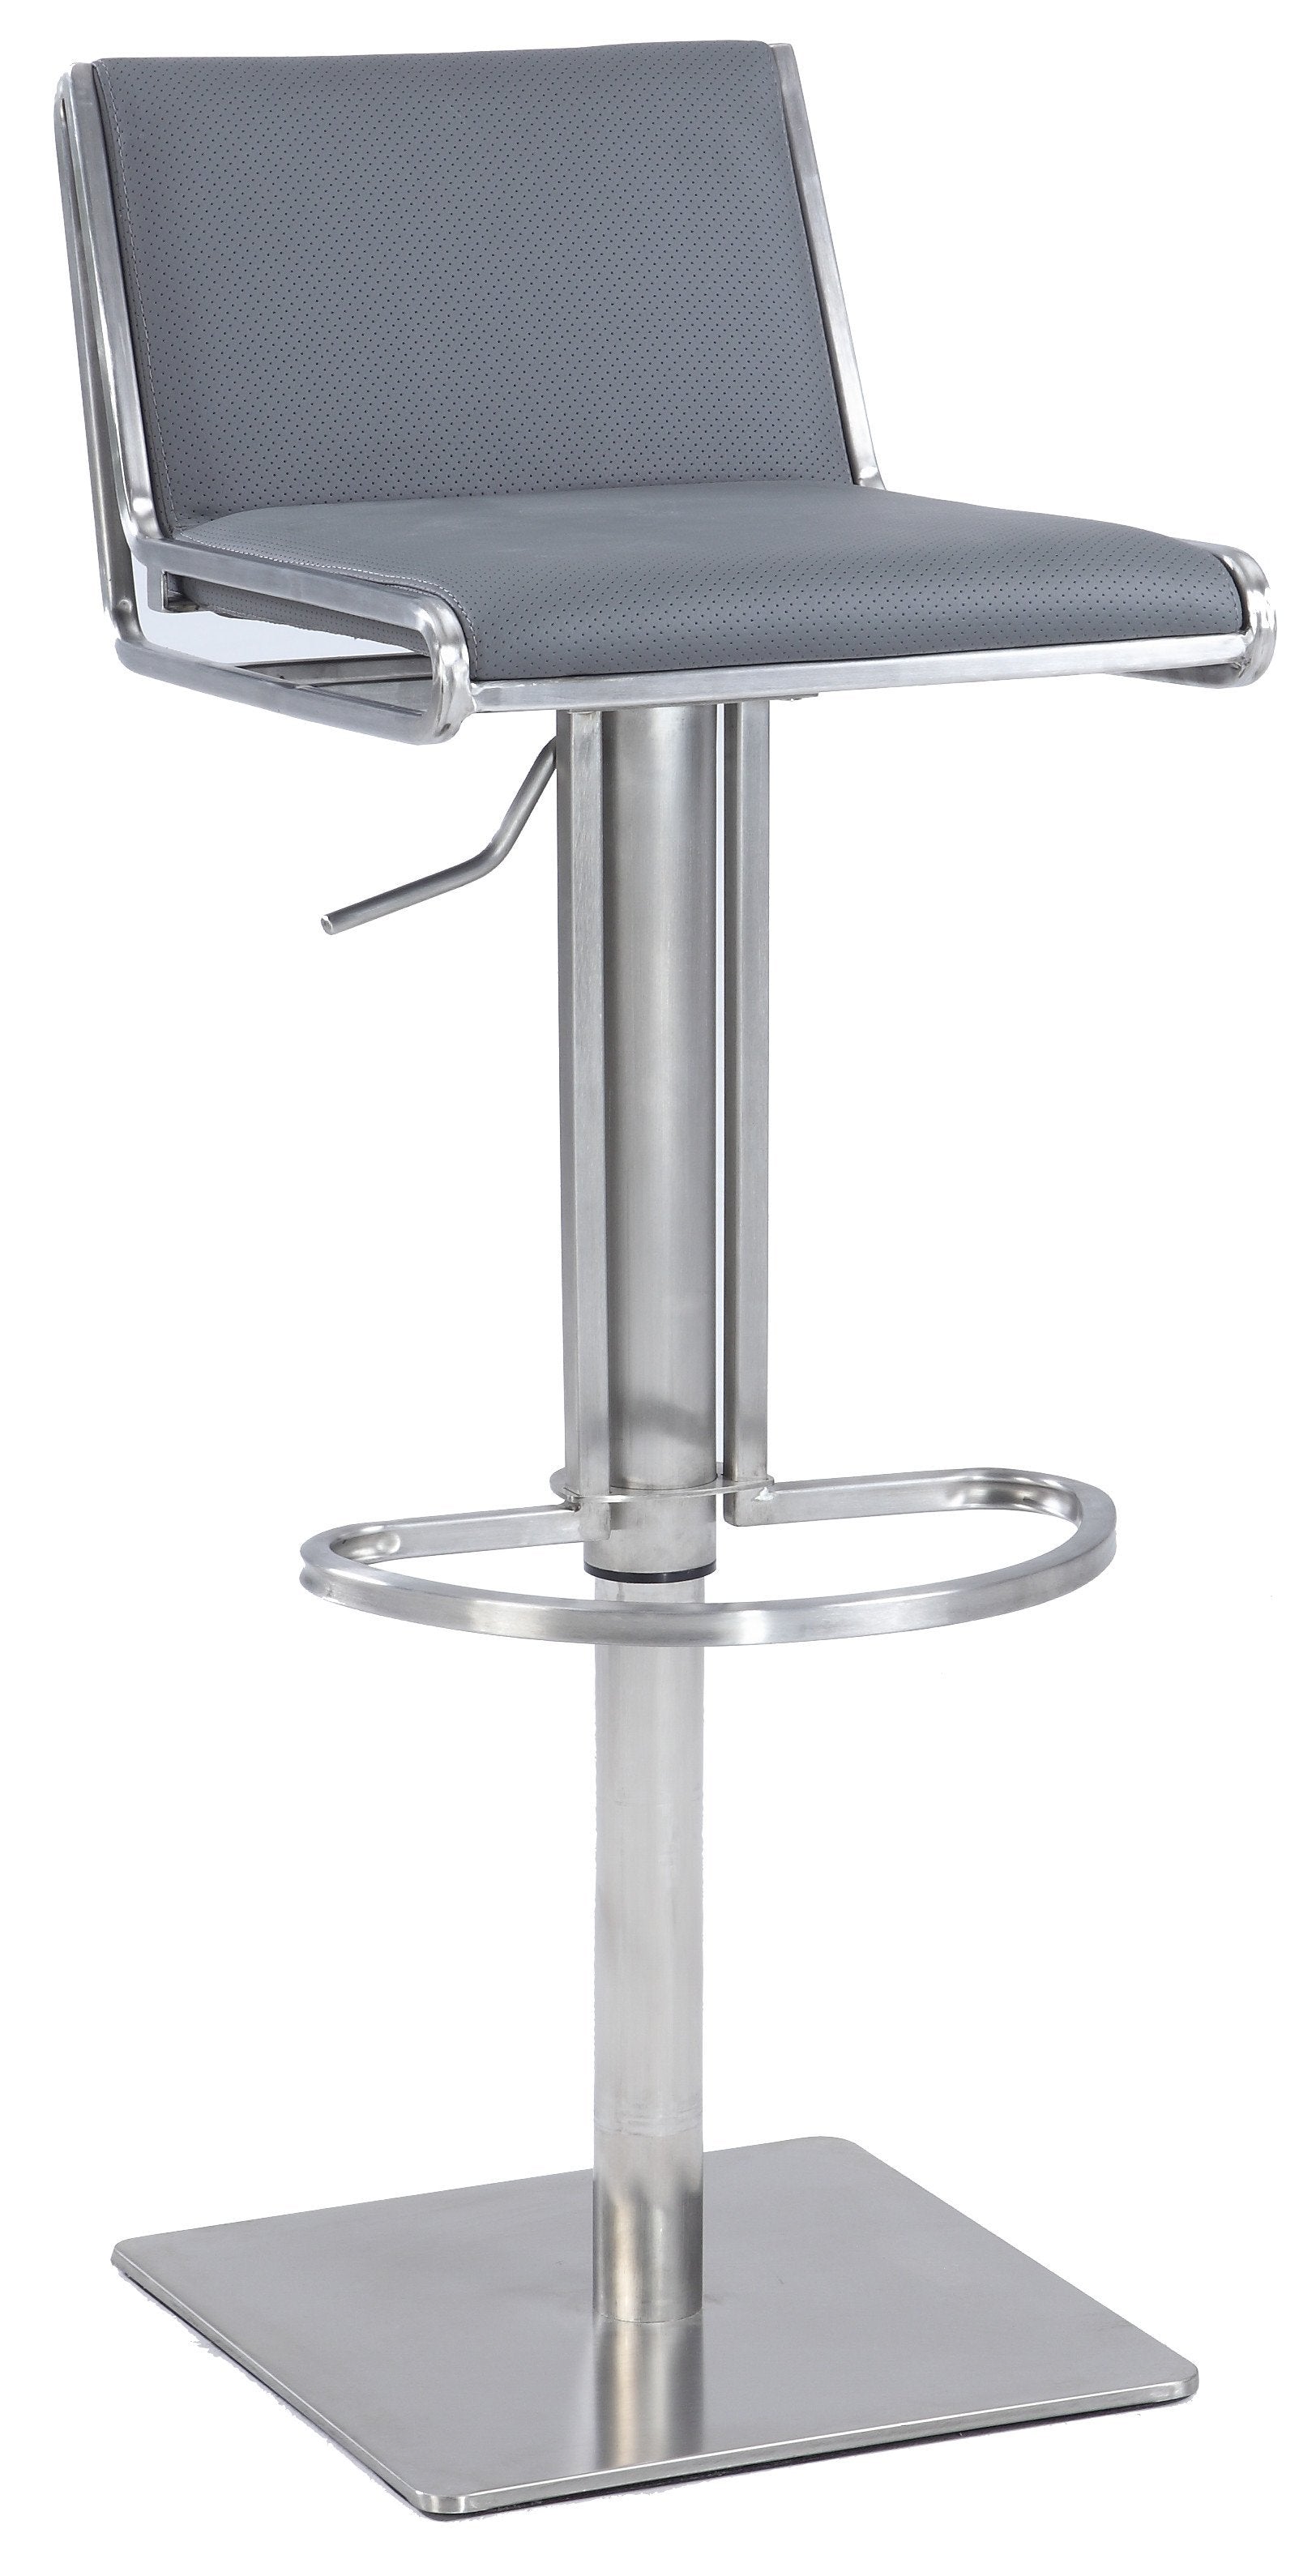 Chintaly 0896-as-gry Slanted Backrest Contemporary Pneumatic Stool